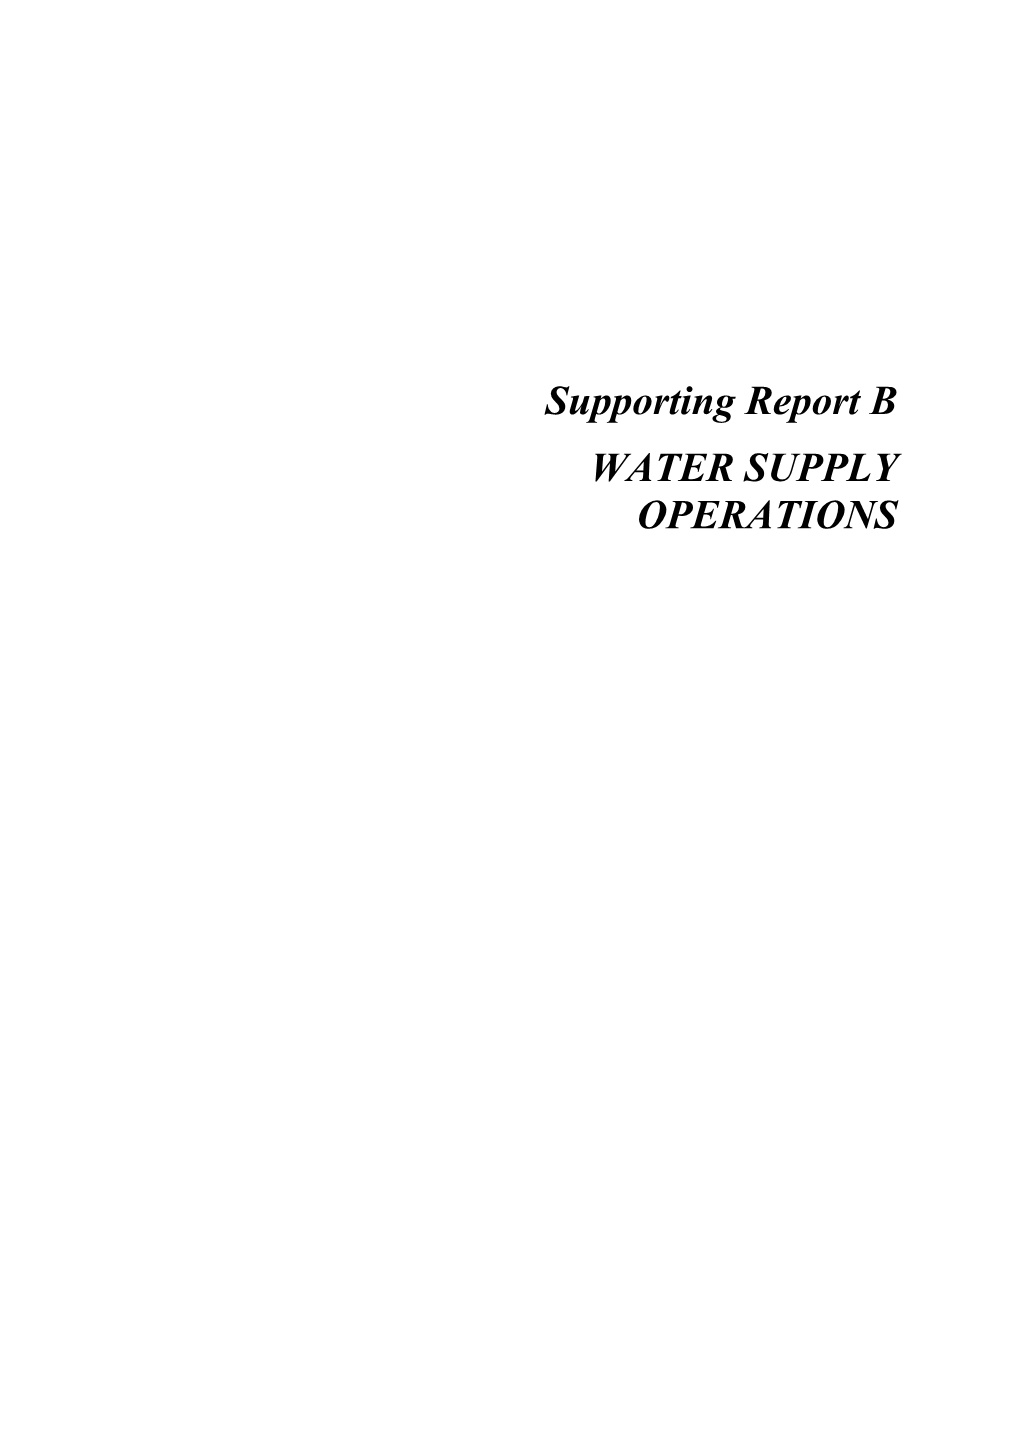 Supporting Report B WATER SUPPLY OPERATIONS